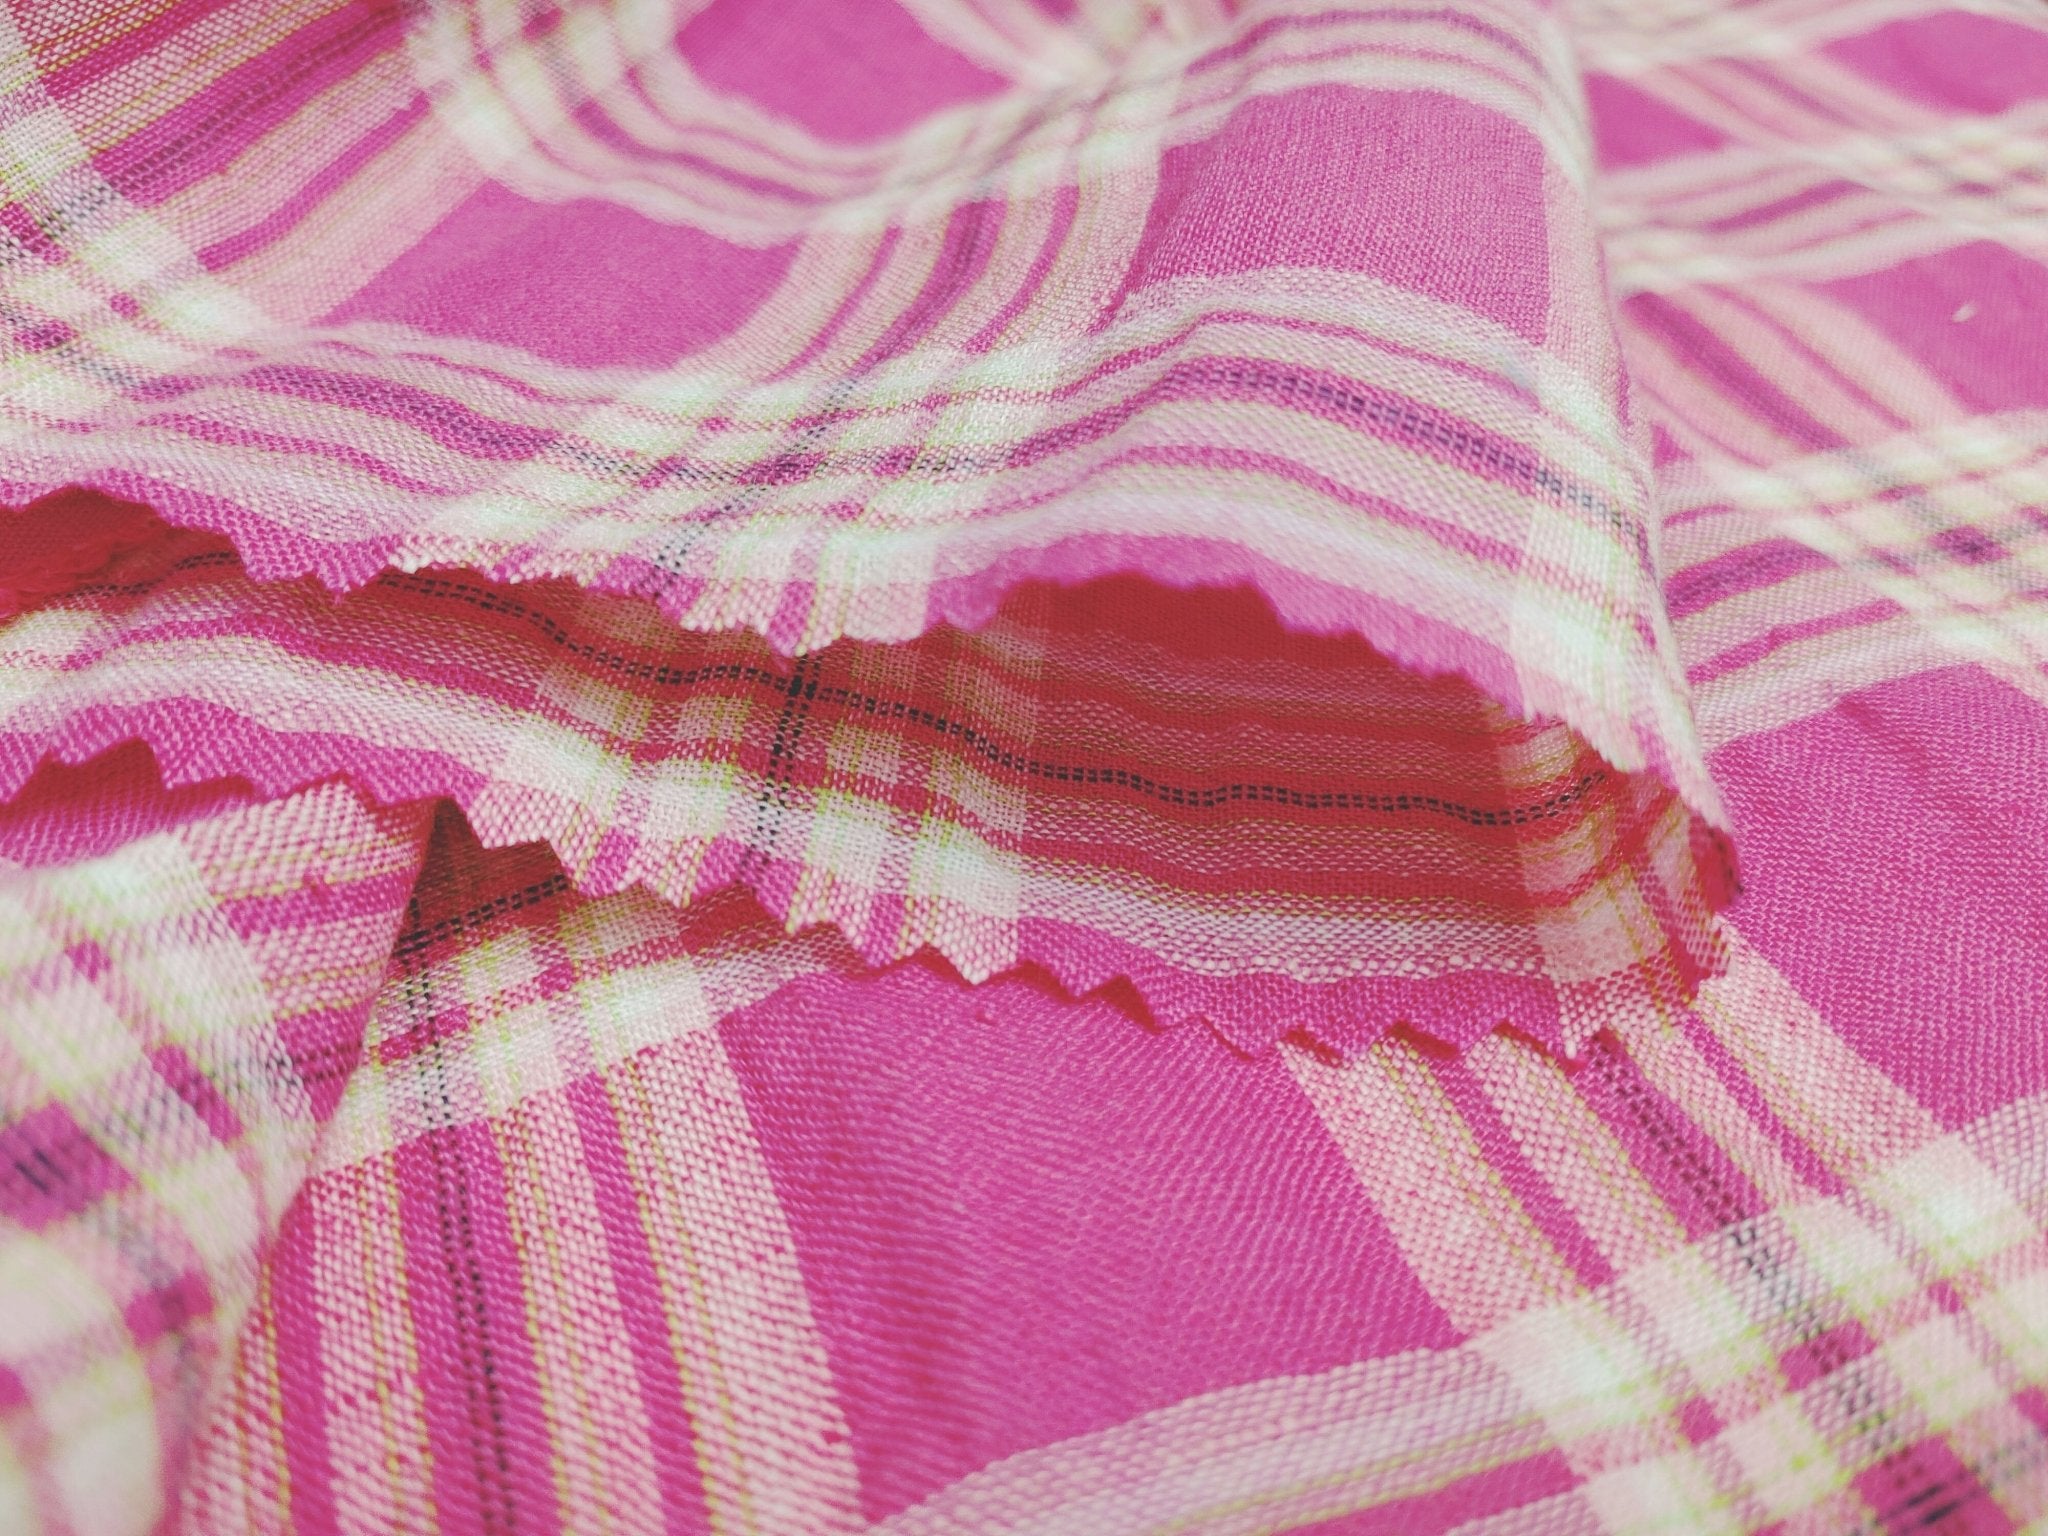 Wrinkled Plaid Fabric: Linen Cotton PU in Pink and Blue Dual Colorway 7269 7270 - The Linen Lab - Pink